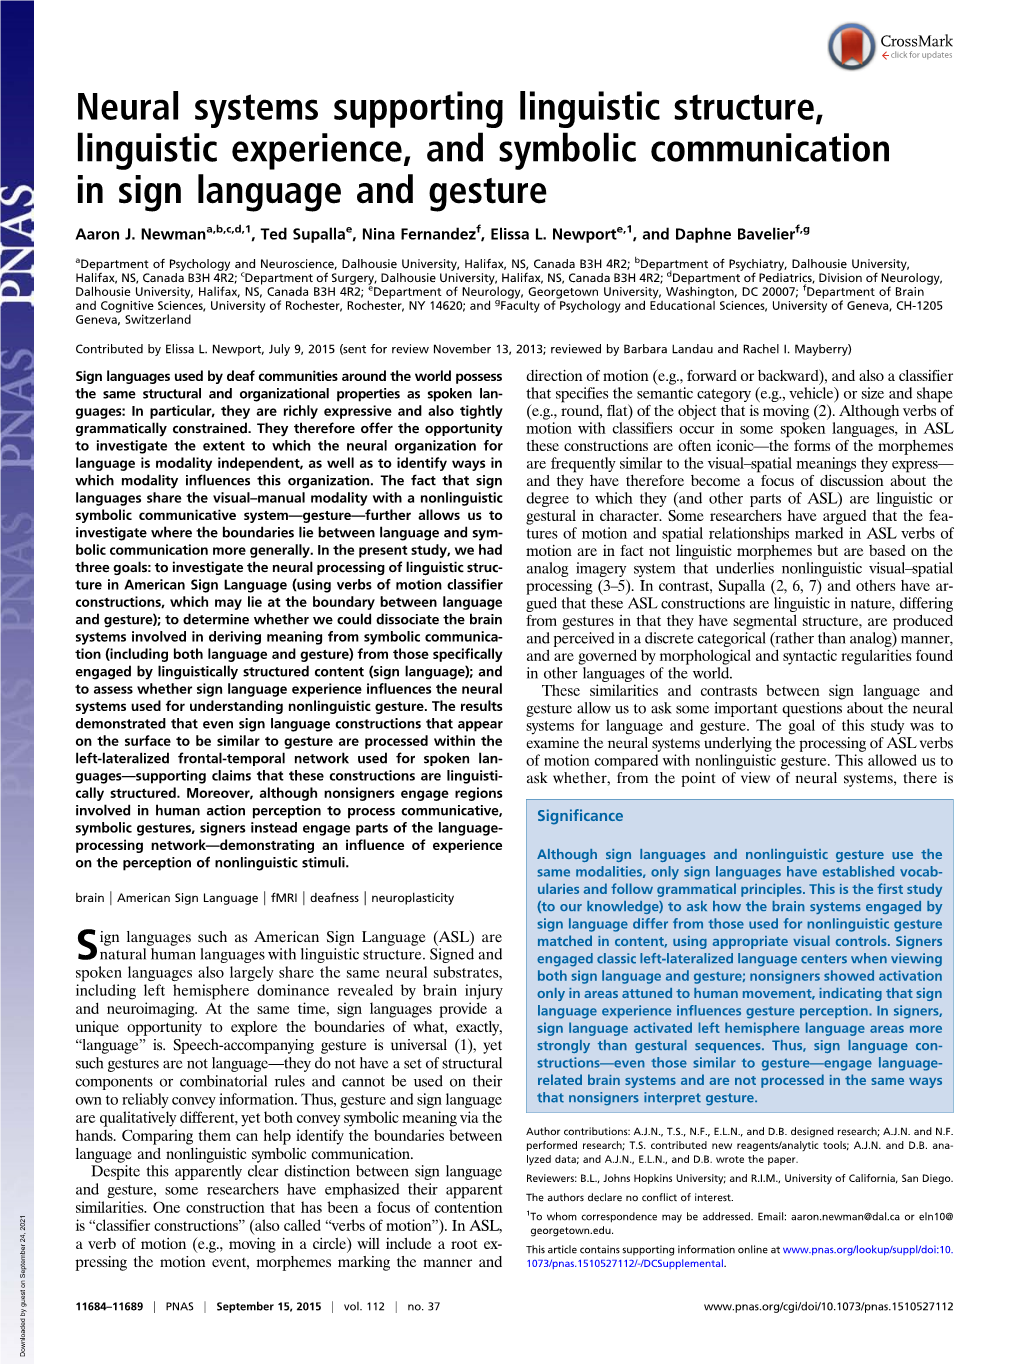 Neural Systems Supporting Linguistic Structure, Linguistic Experience, and Symbolic Communication in Sign Language and Gesture